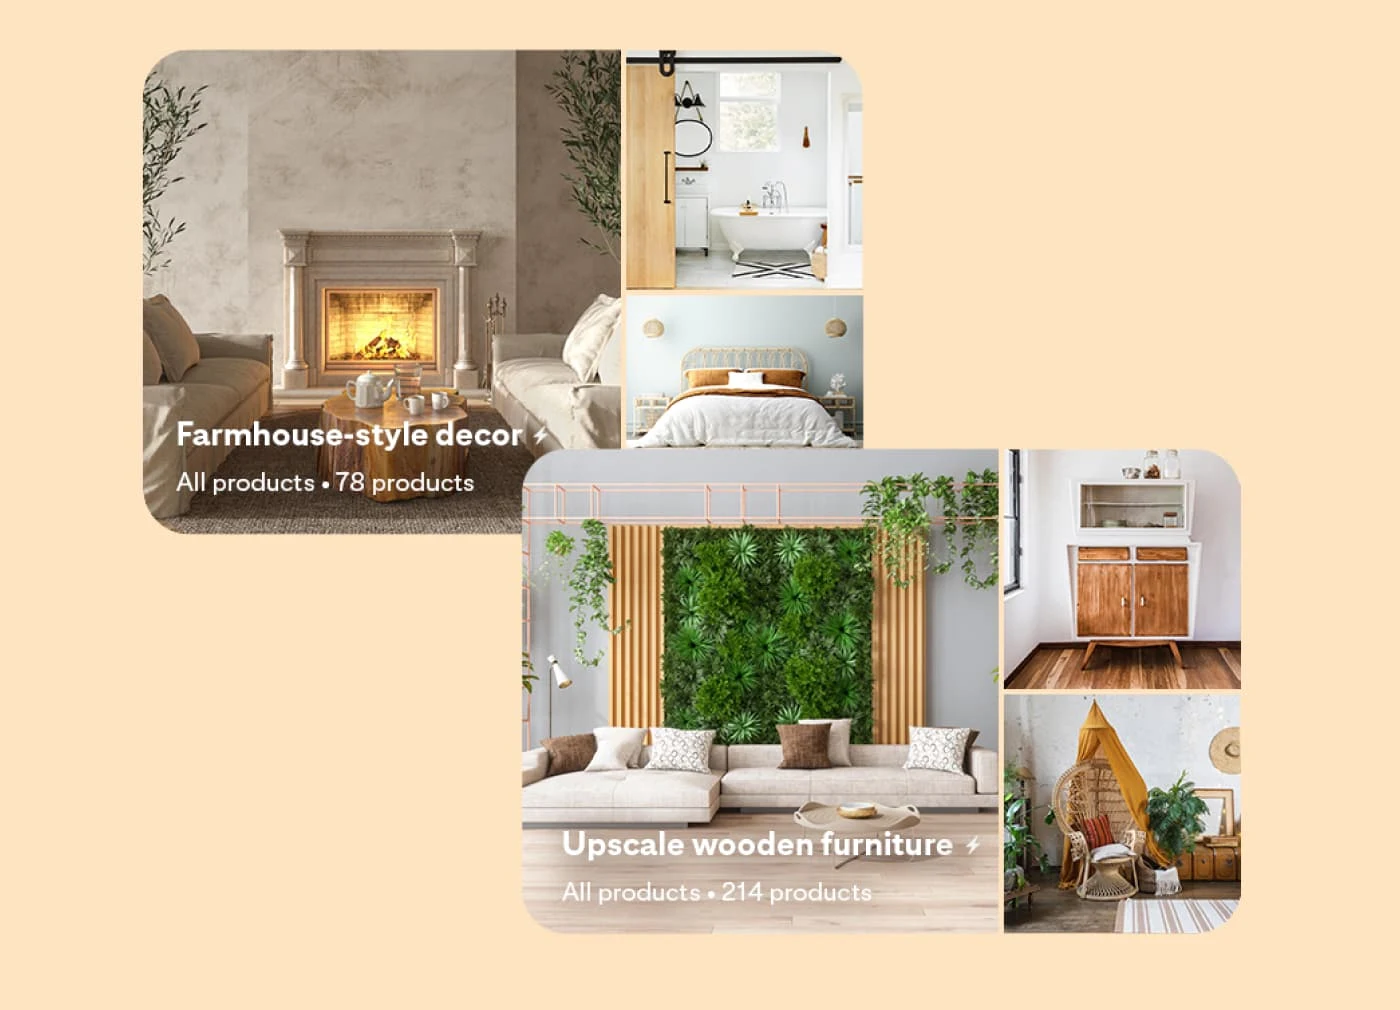 Two Pinterest boards side by side: One for farmhouse-style decor with three photos; a living room, bedroom, and bathroom. The second board highlights upscale wooden furniture, including a living room, modern chest of drawers, and a tasteful chair. 